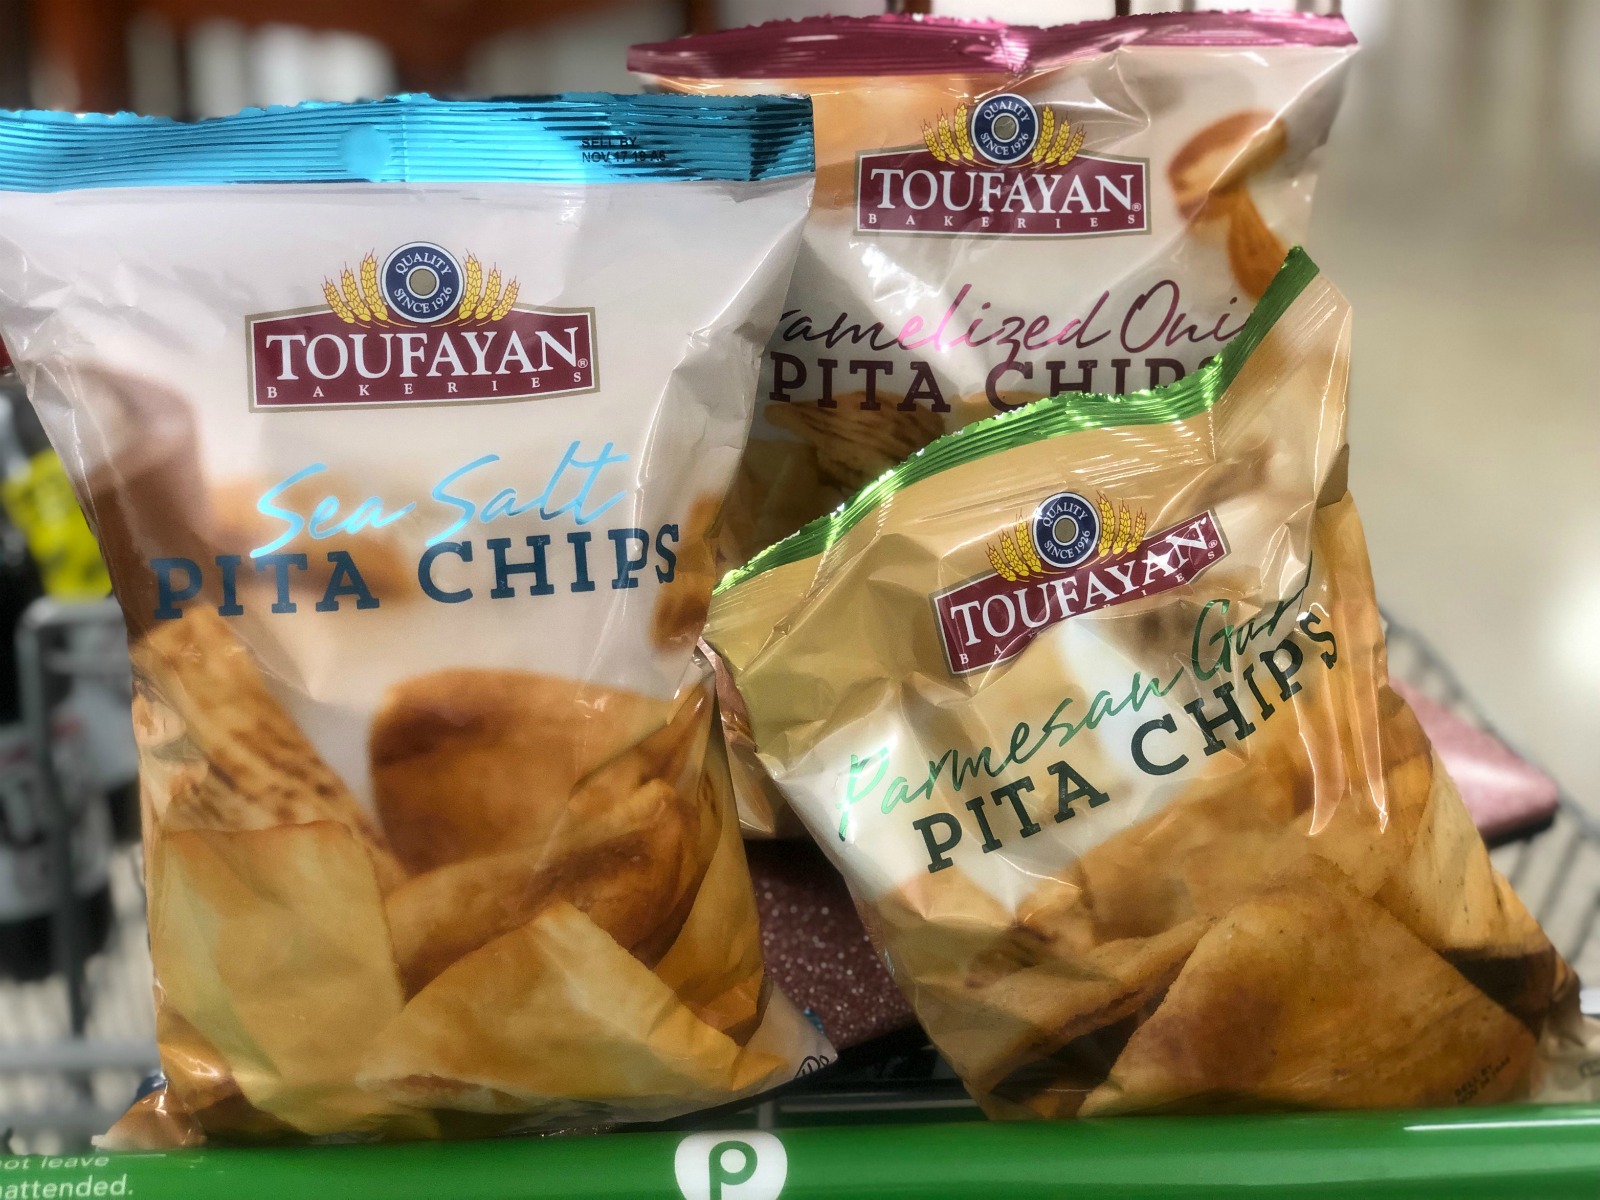 ALL Toufayan Pita Chips Are Buy One, Get One FREE This Week At Publix (Regular & Gluten Free!)